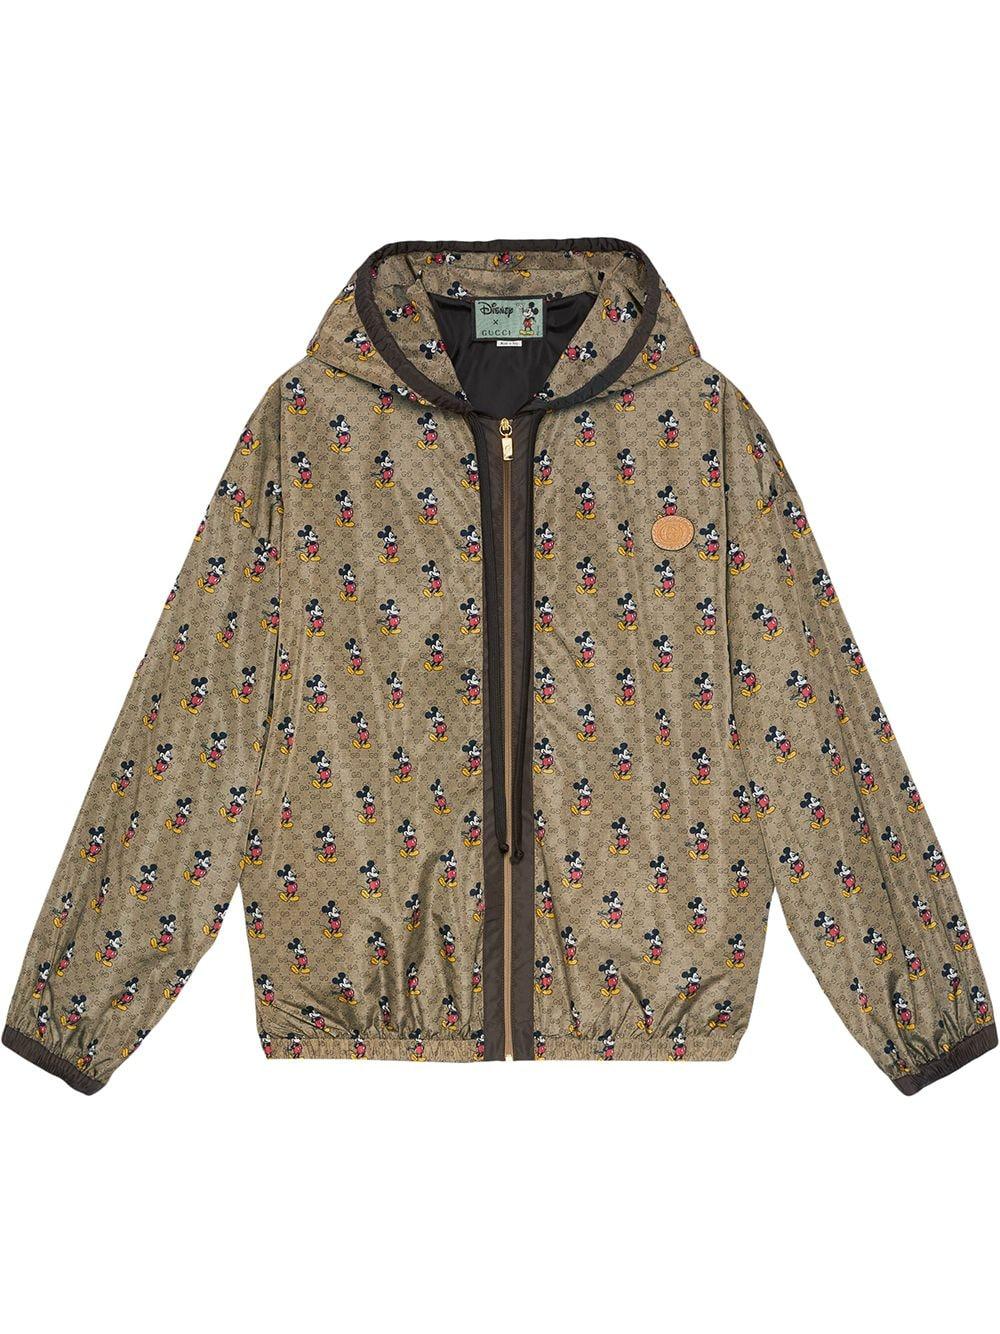 Gucci X Disney GG And Mickey Printed Jacket | Lyst